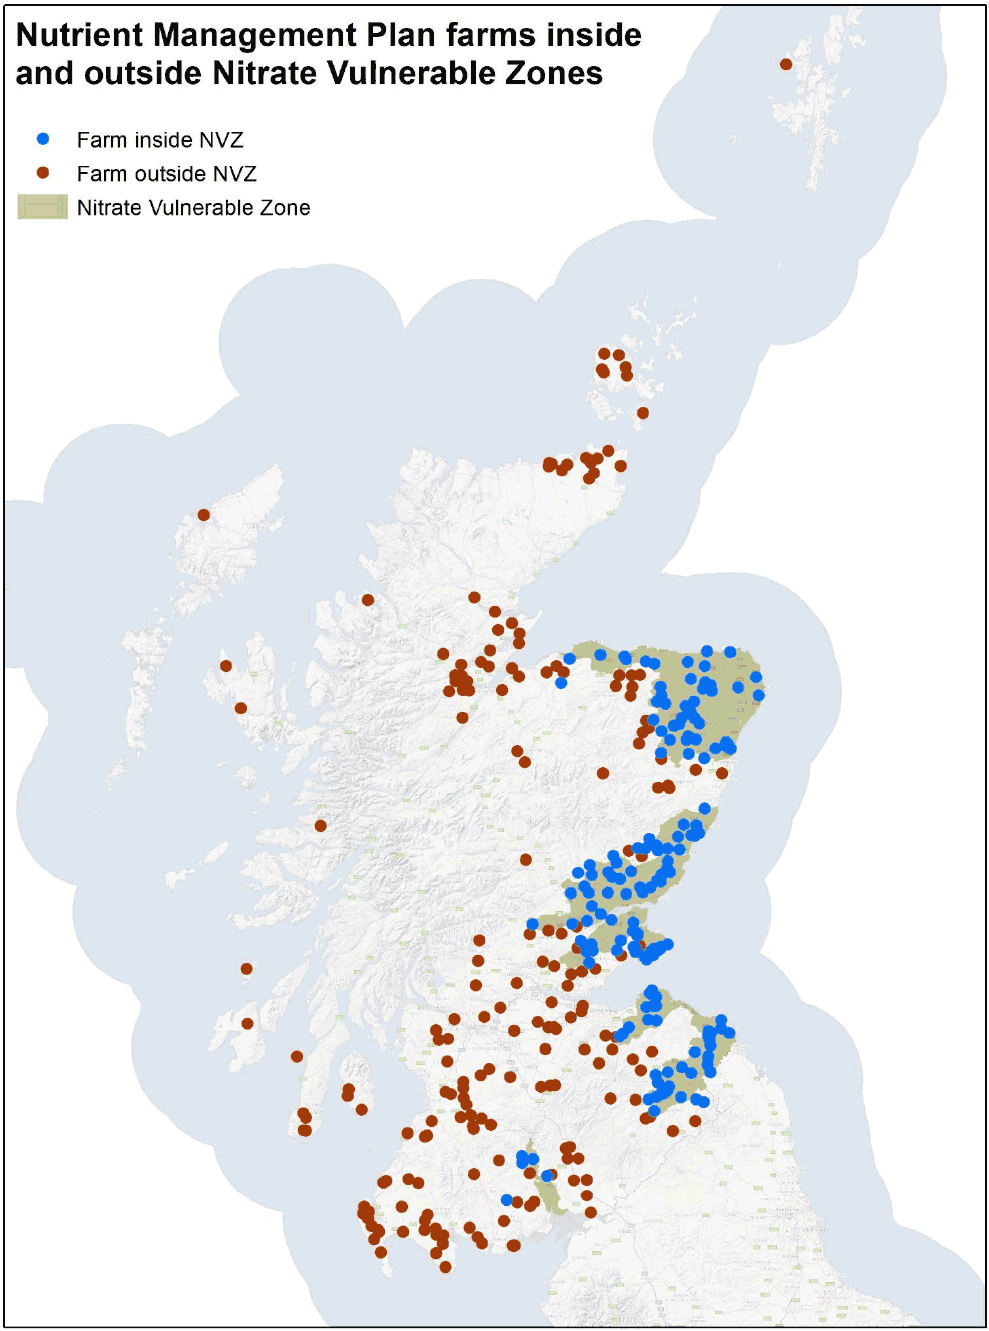 Map of Scotland displaying all famrs undertaking a nutrient mangagement plan and their location in relaiton to Nitrate Vulnerable Zones (NVZs).